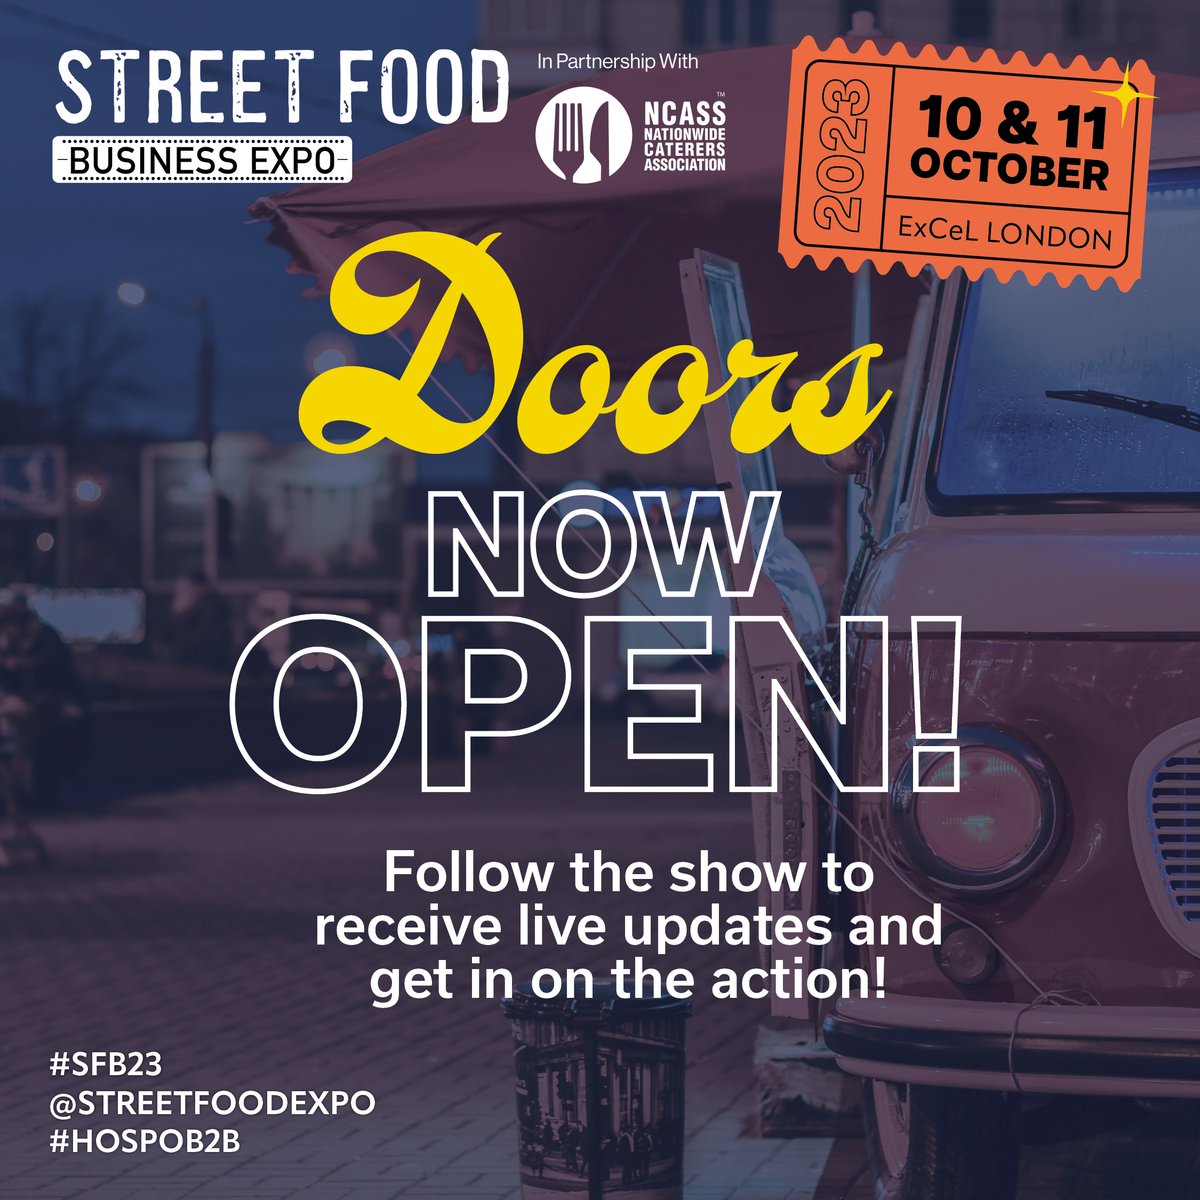 🙌 DOORS OPEN! 🙌 Welcome to Street Food Business Expo! Exciting day ahead. Share your journey with us - tag us in your photos and videos. For ticket help, head to the main entrance. Let's make today amazing! 🎟️ 

#sfbe23 #streetfood #DoorsOpen #Day1